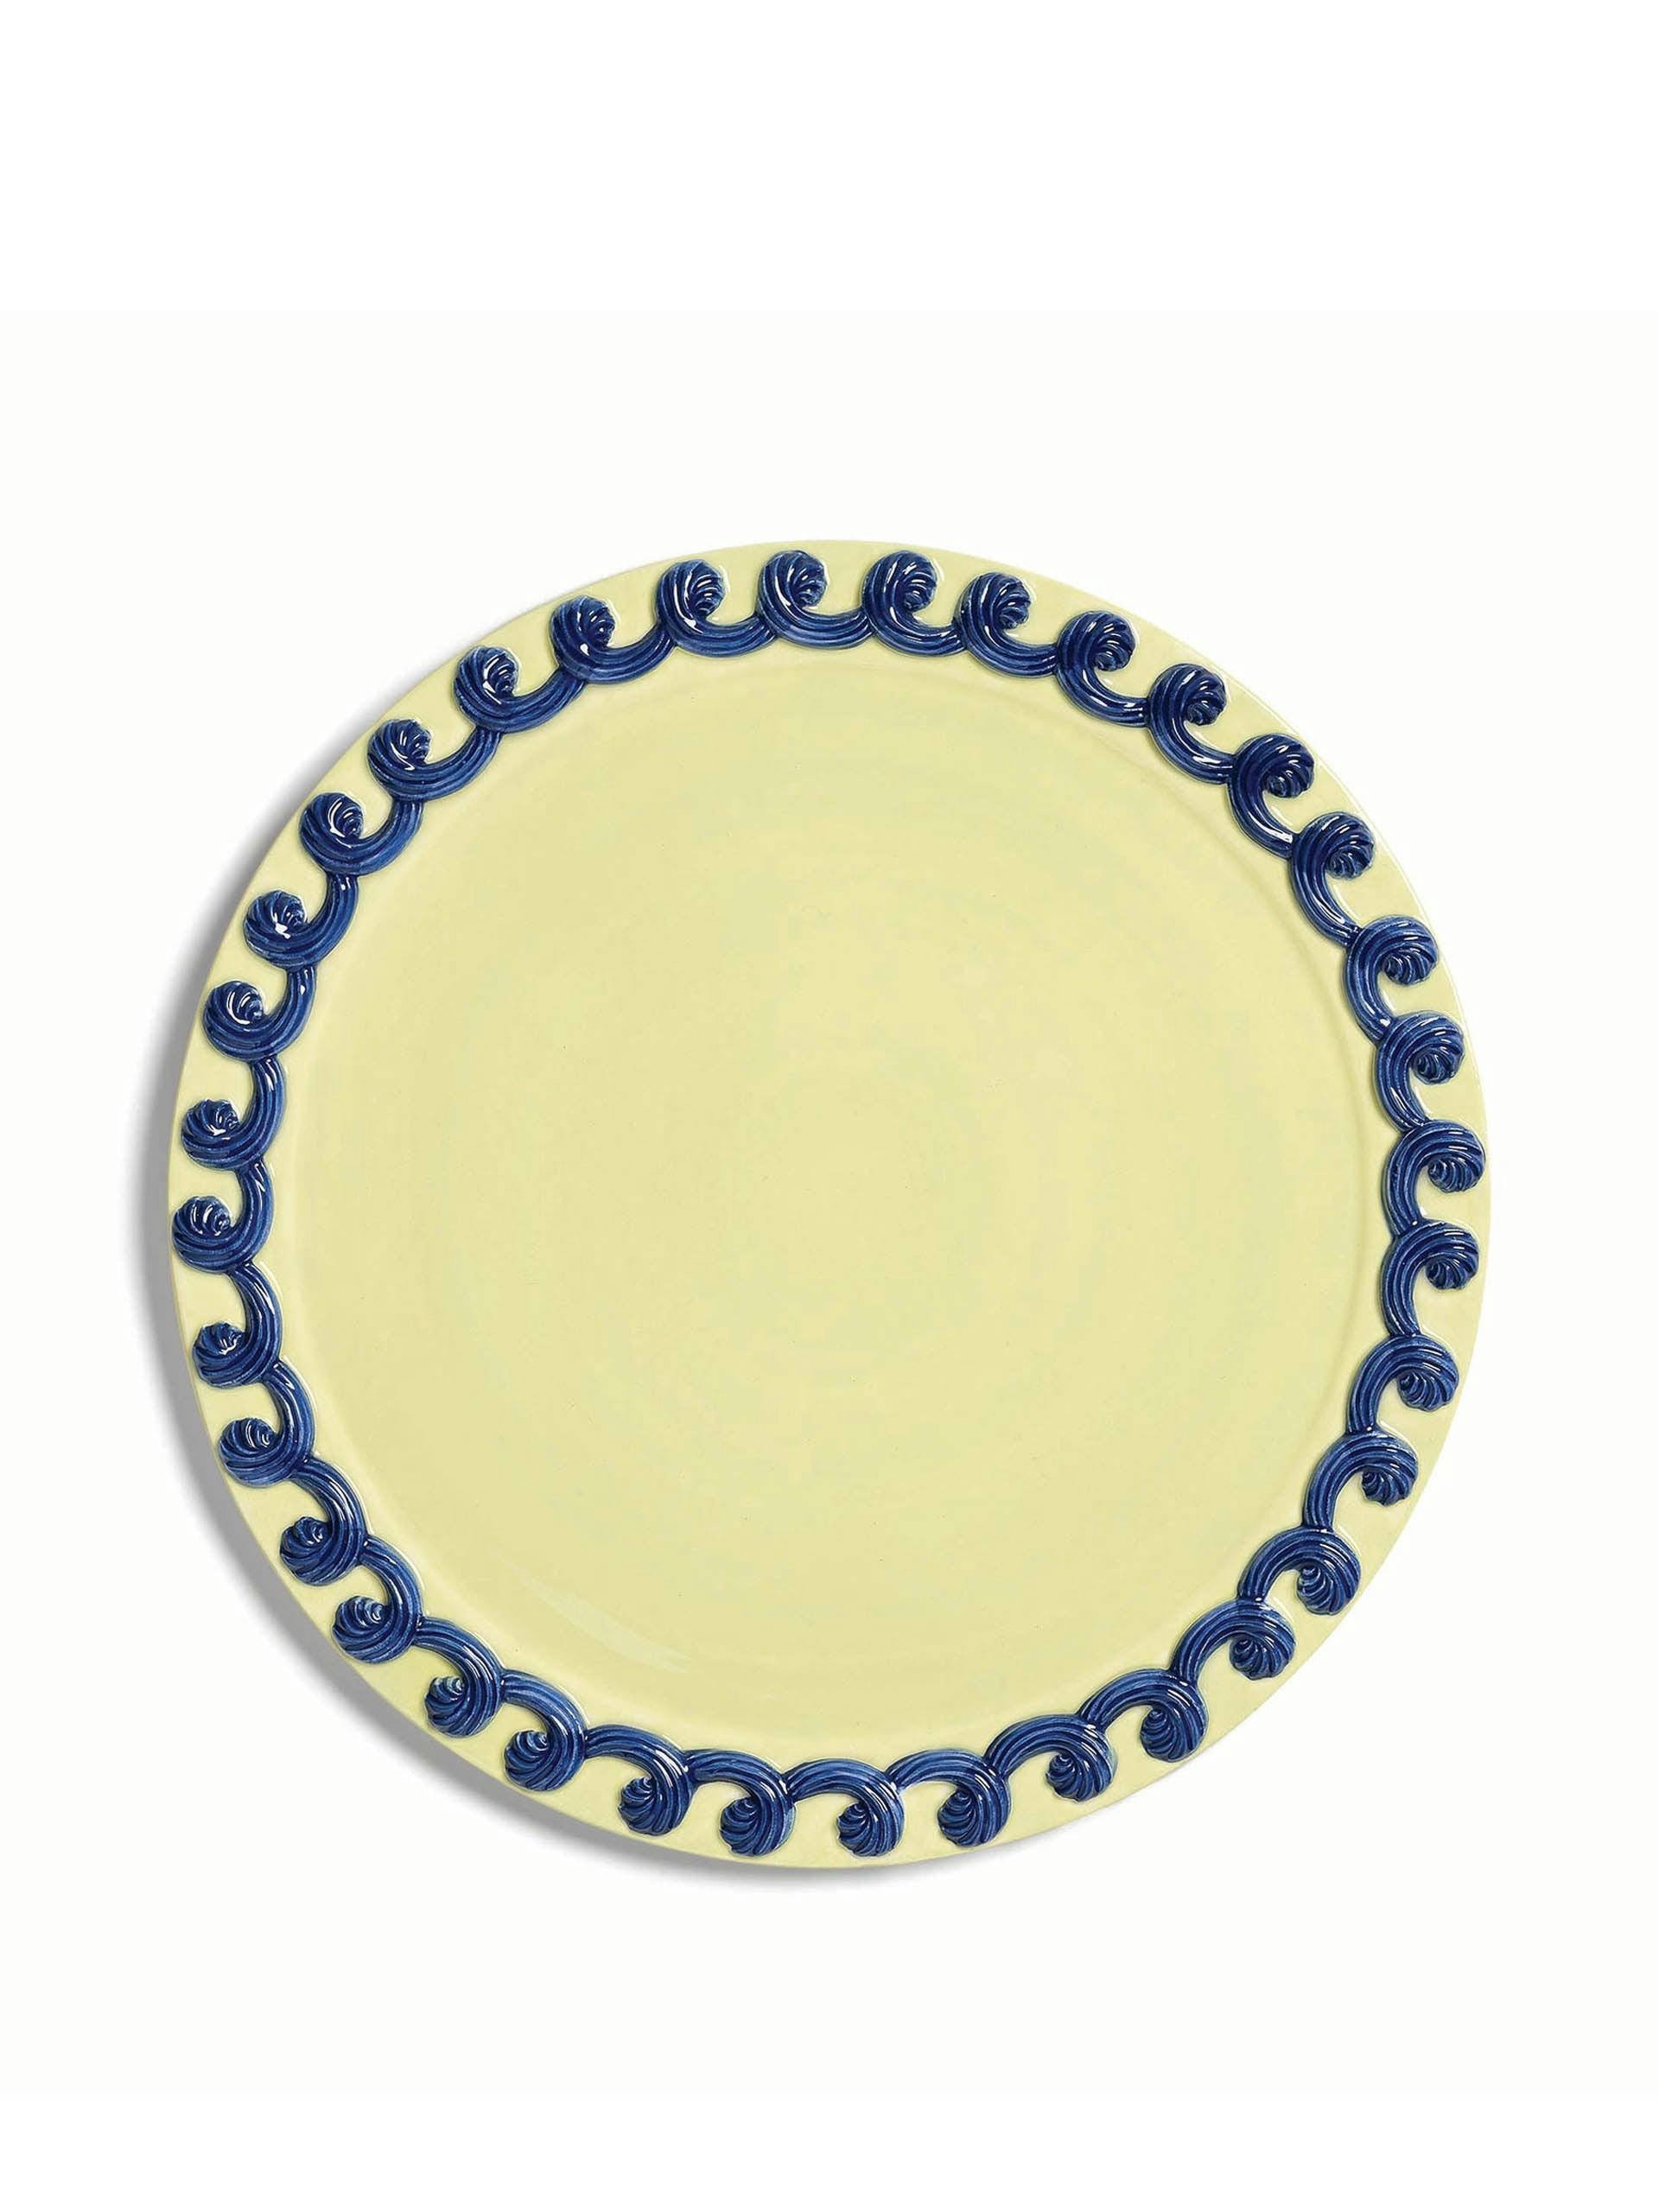 Whip plate in yellow